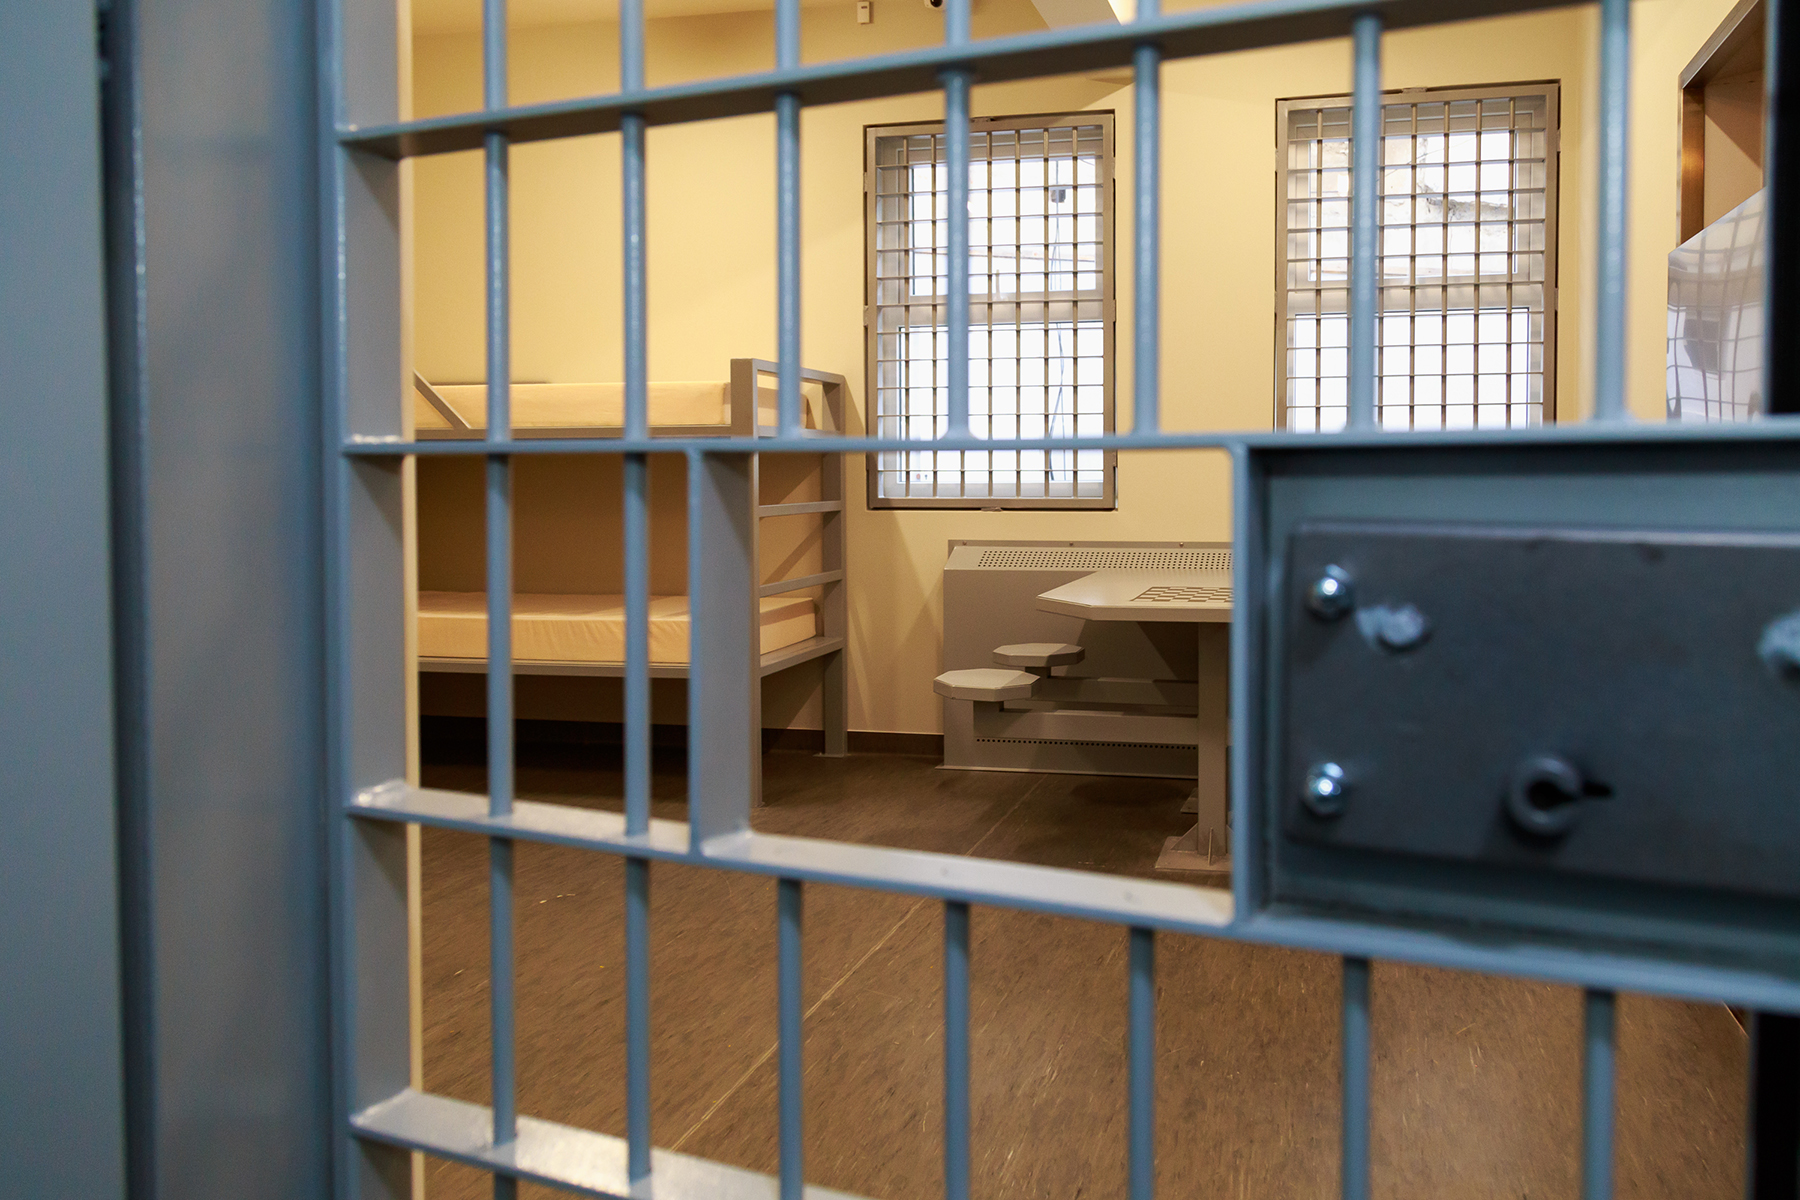 Some Wisconsin jails charge inmates pay-to-stay fees